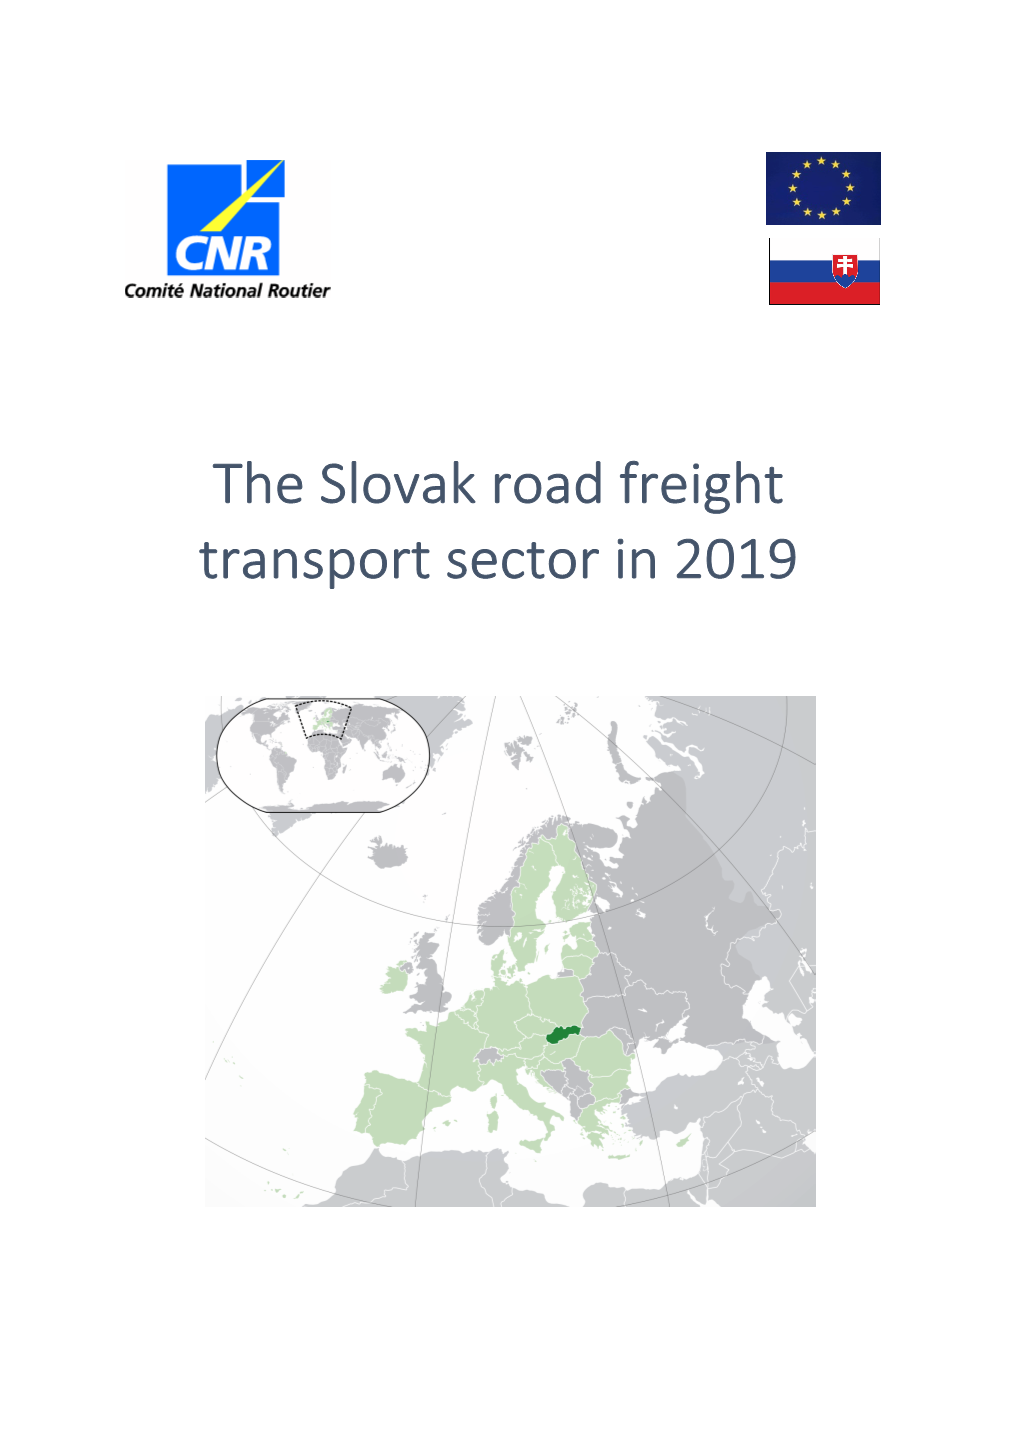 CNR-The Slovak Road Freight Transport Sector 2019